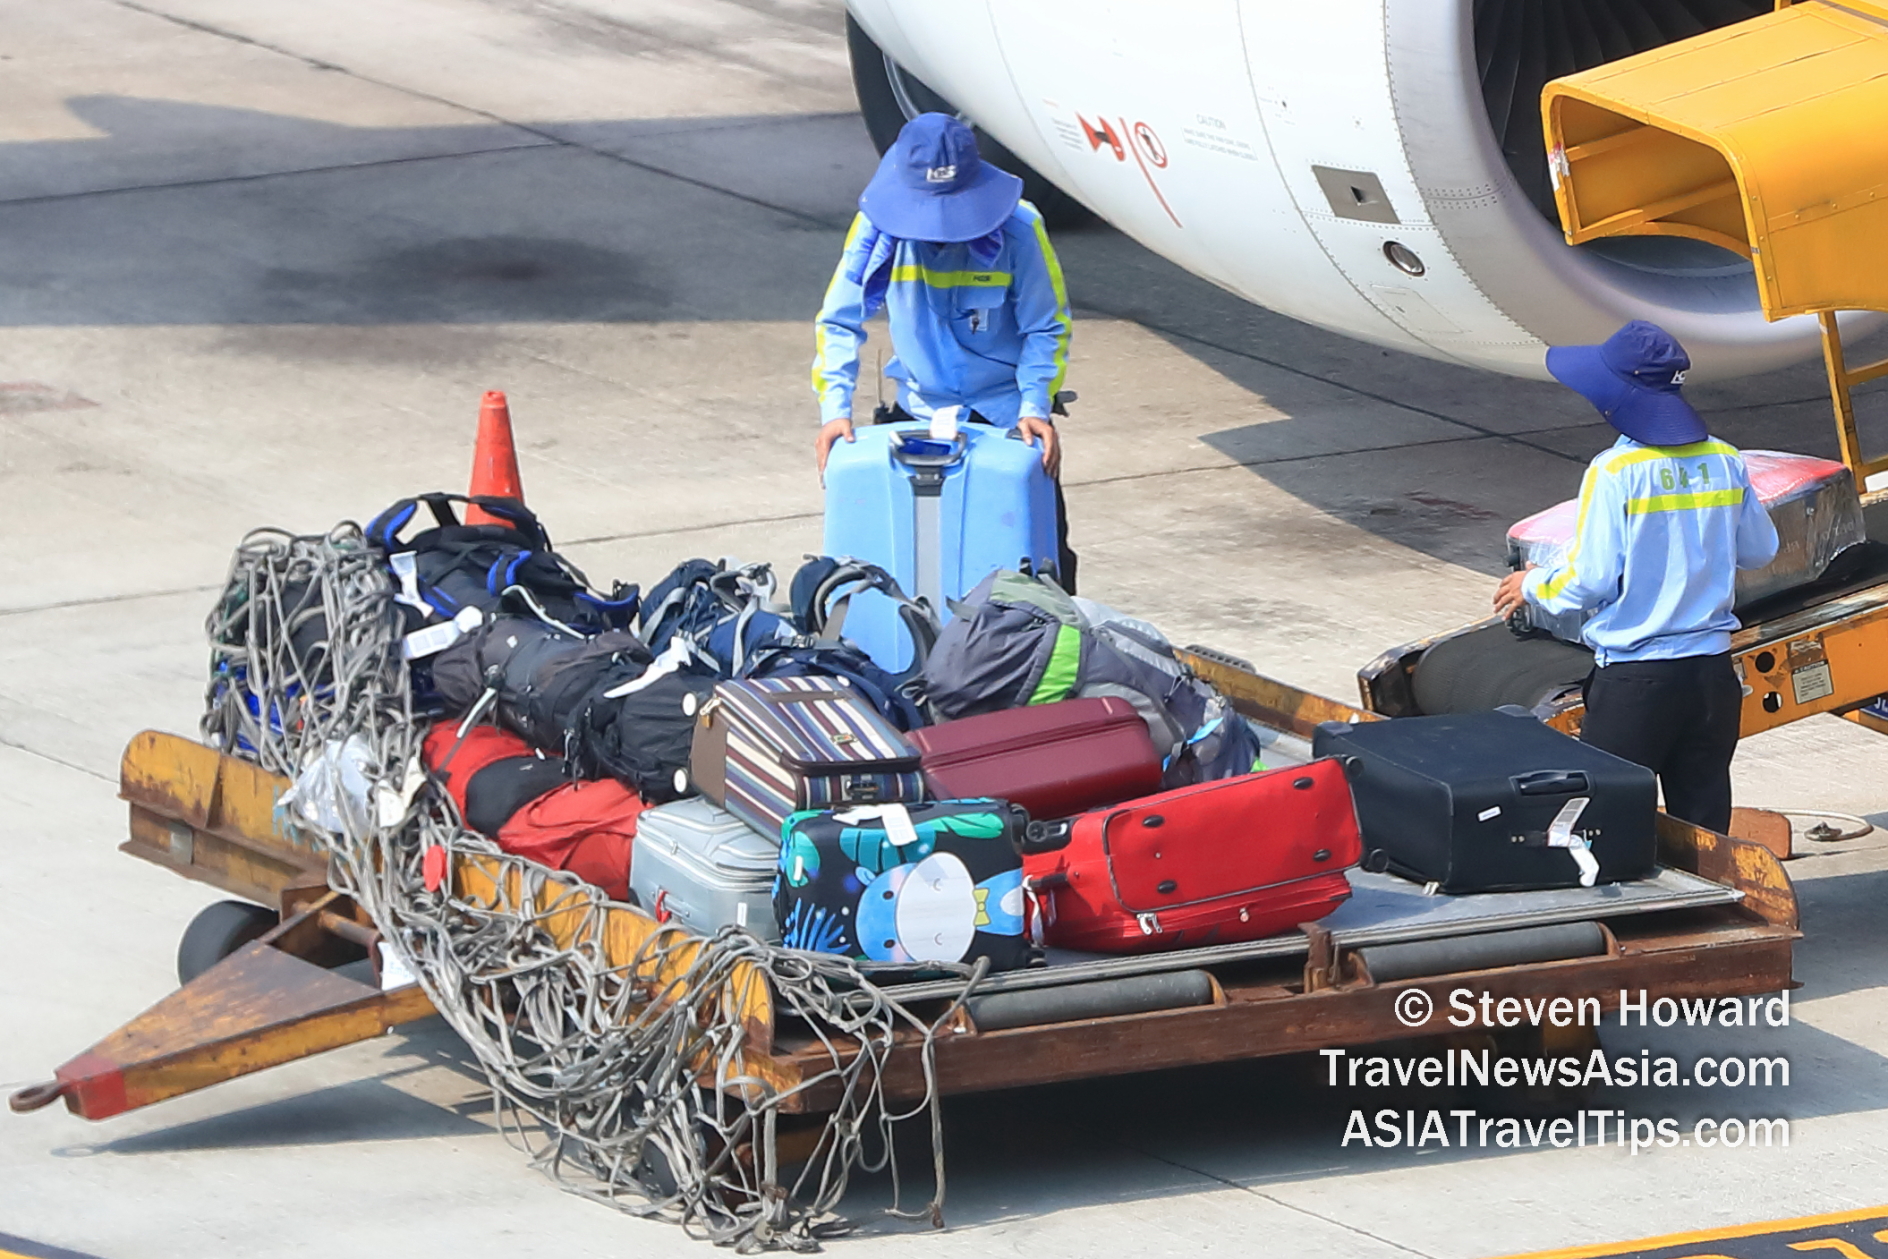 Baggage being manually loaded onto a plane. Picture by Steven Howard of TravelNewsAsia.com Click to enlarge.